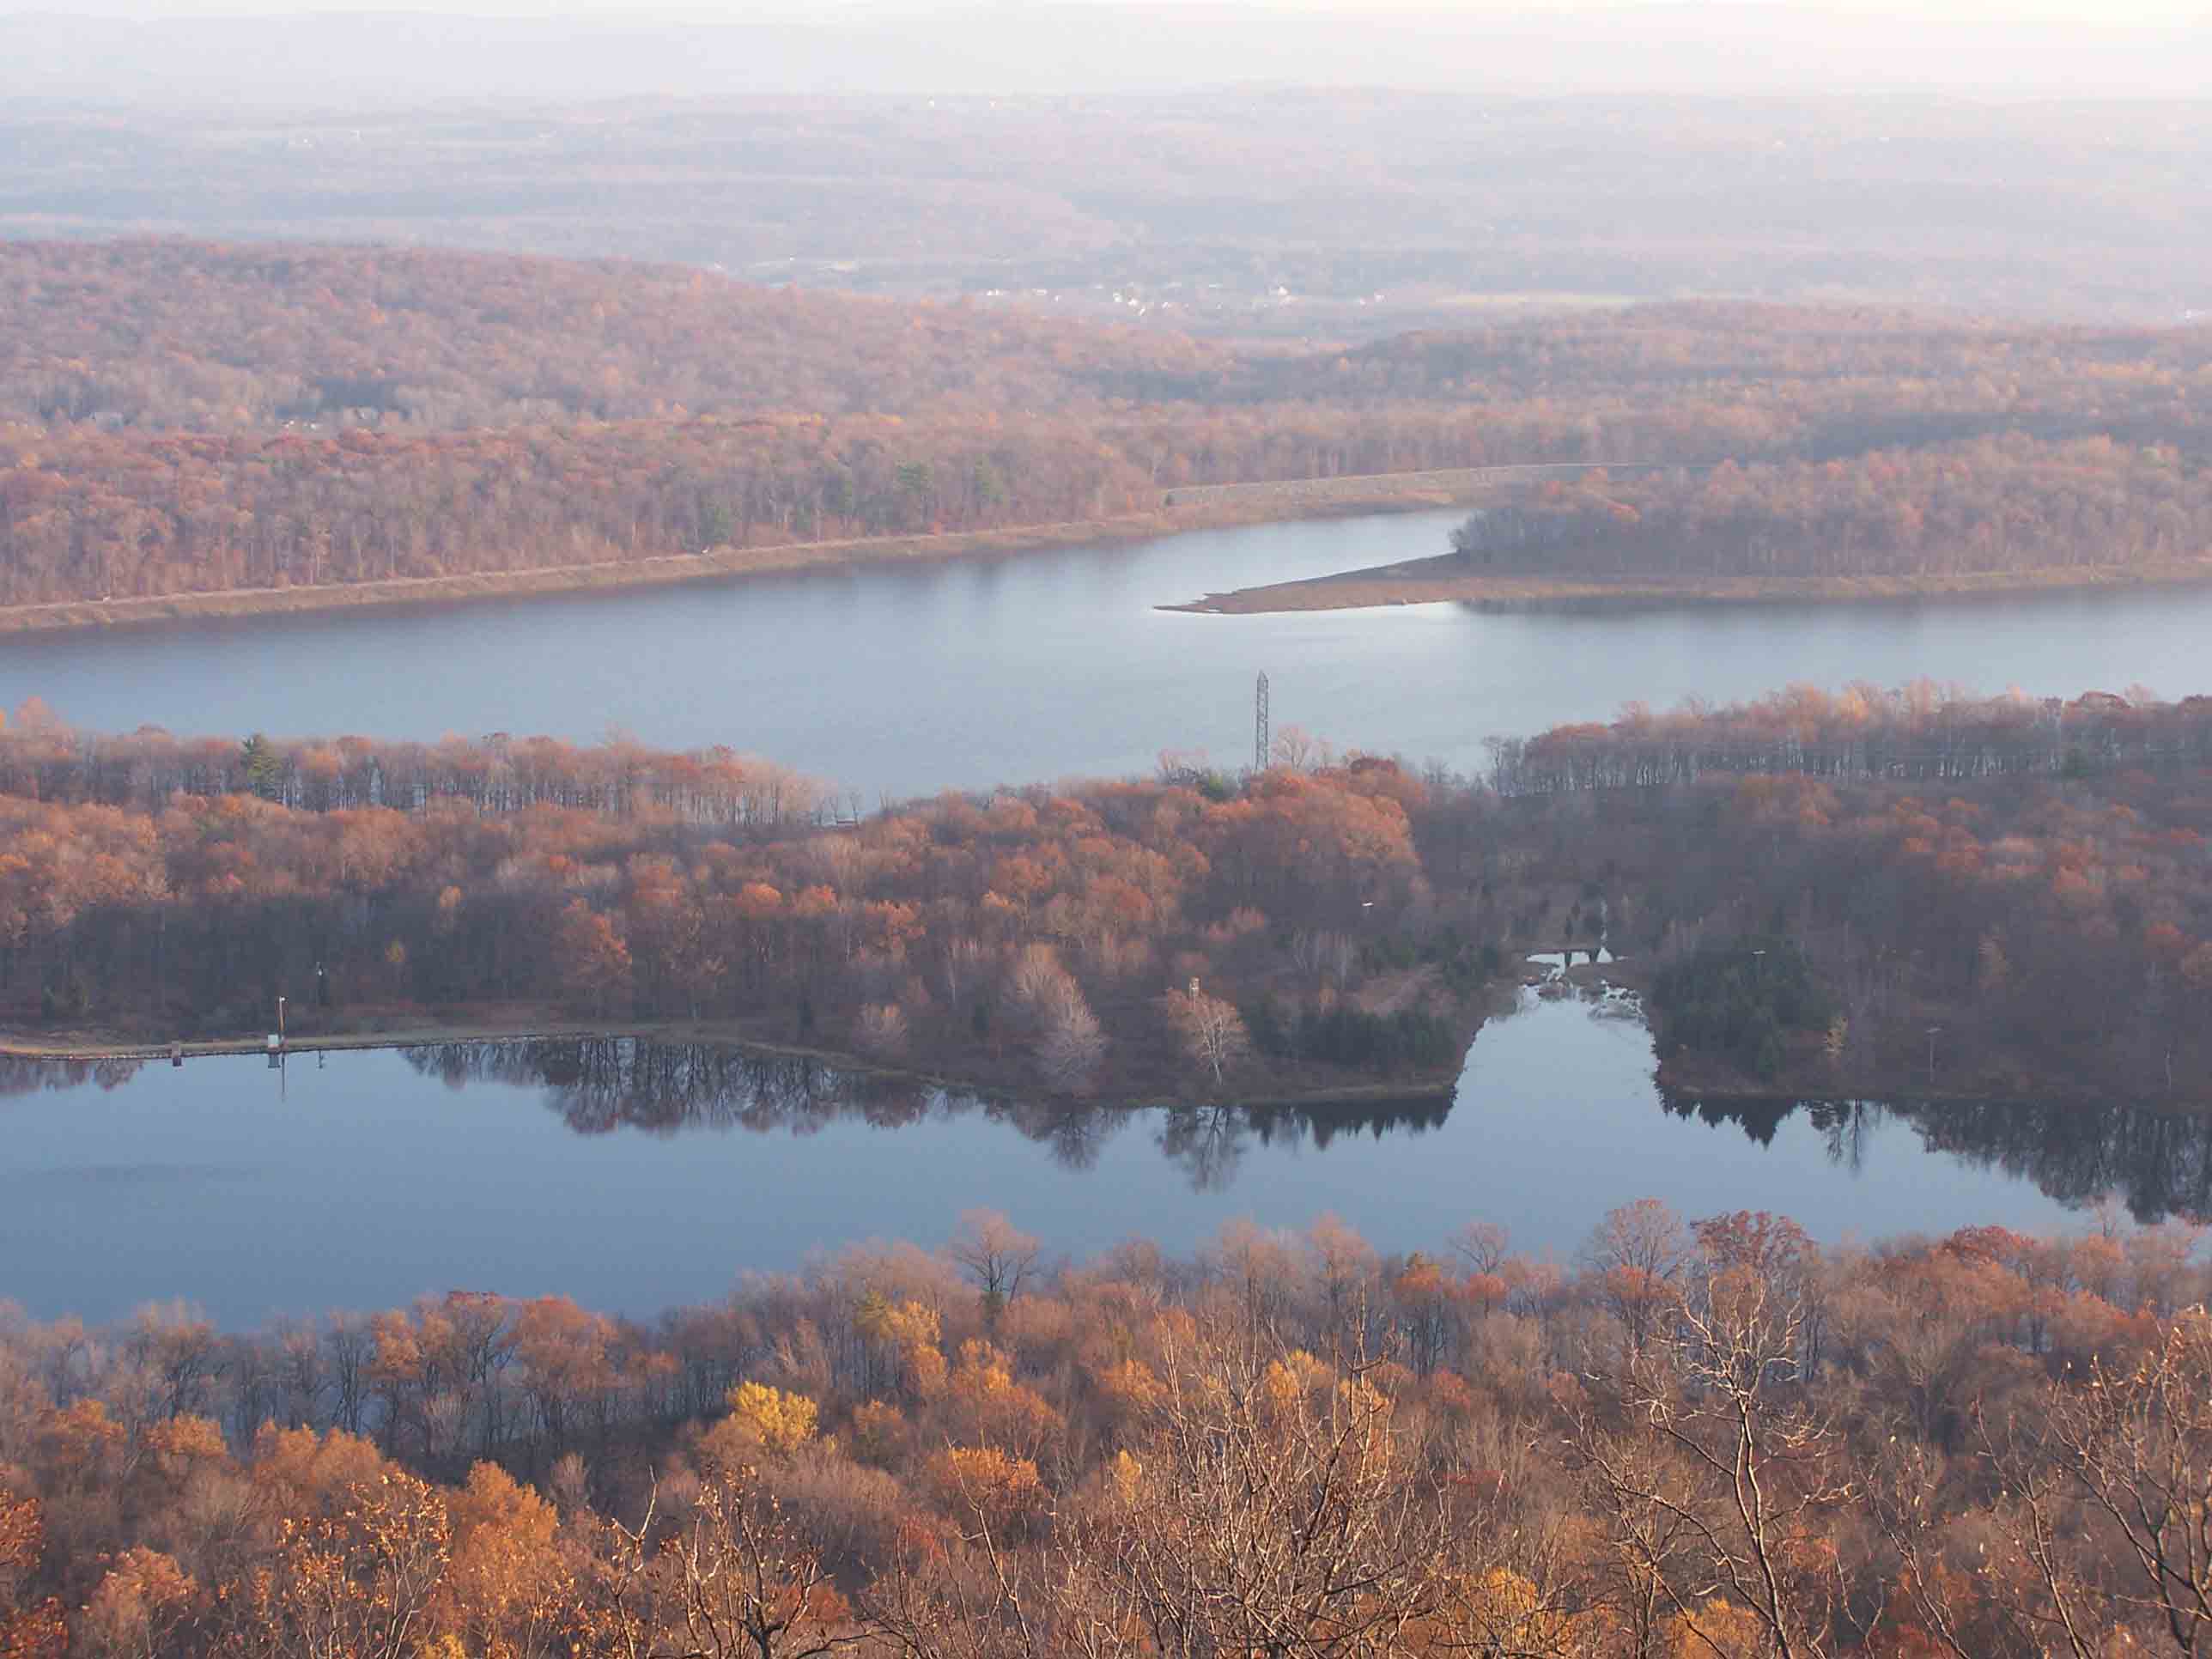 View of Yards Creek Reservoir. Courtesy at@rohland.org